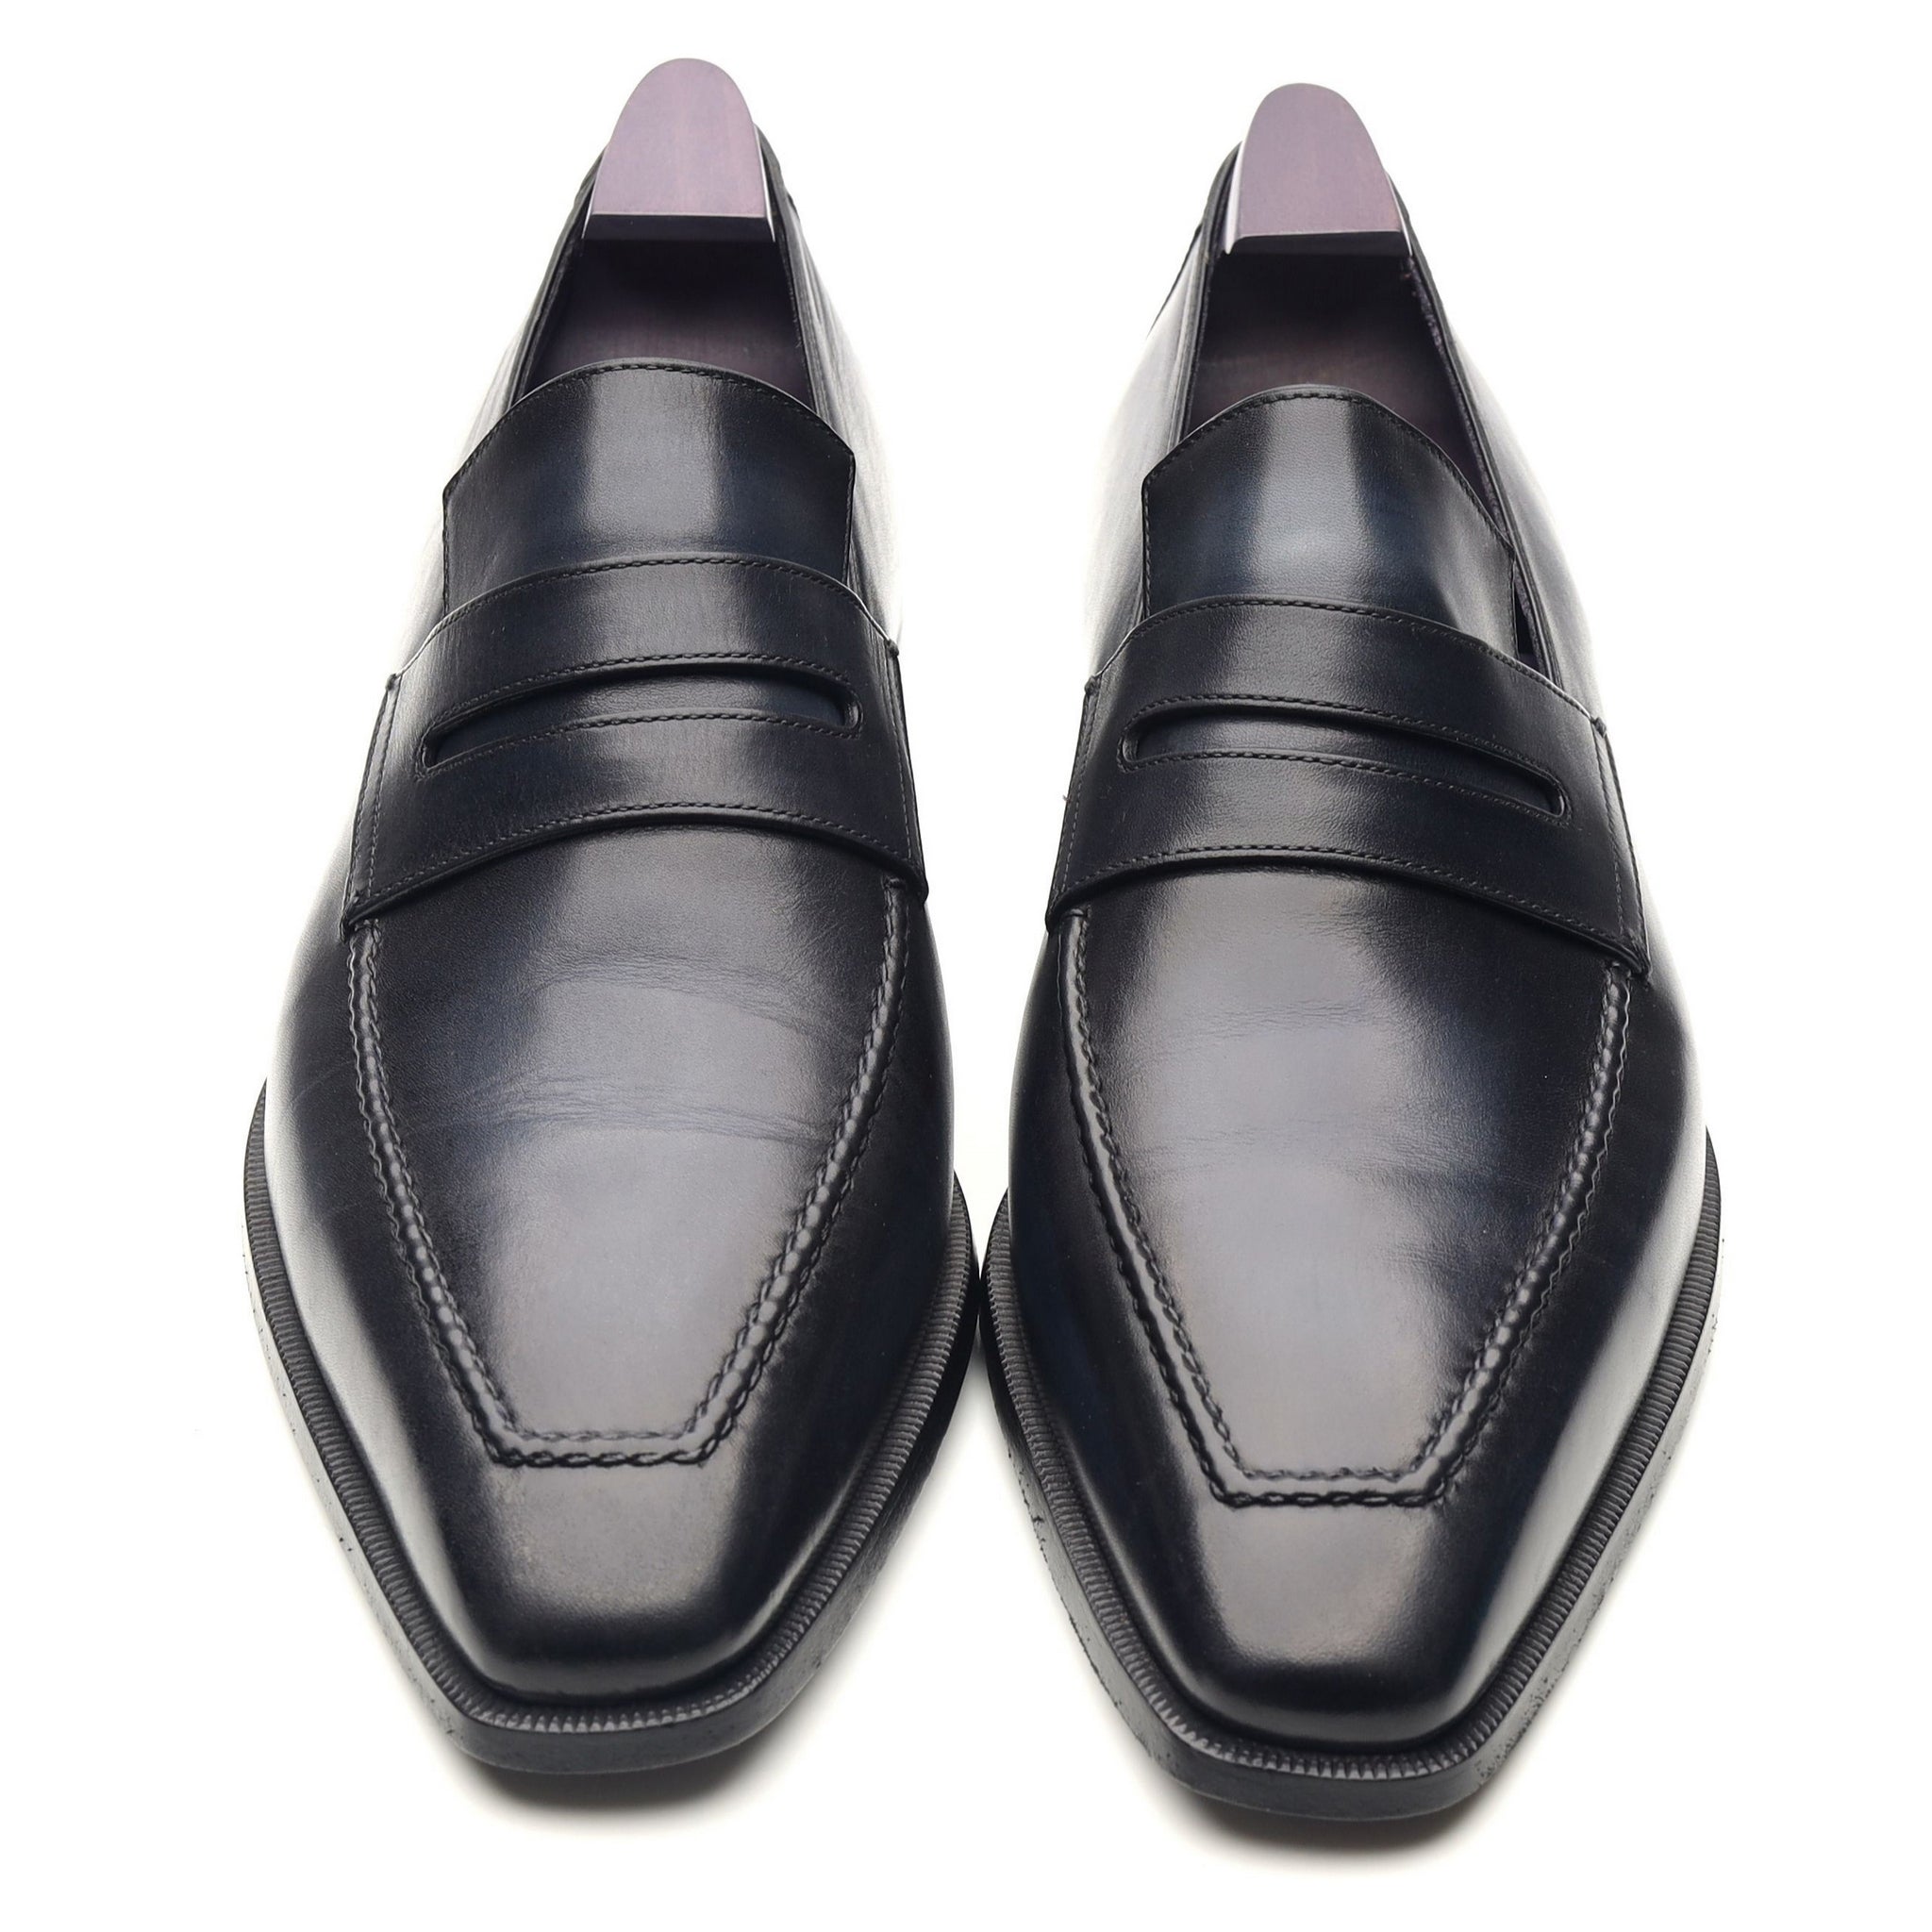 'Andy' Navy Blue Leather Loafers UK 9.5 - Abbot's Shoes